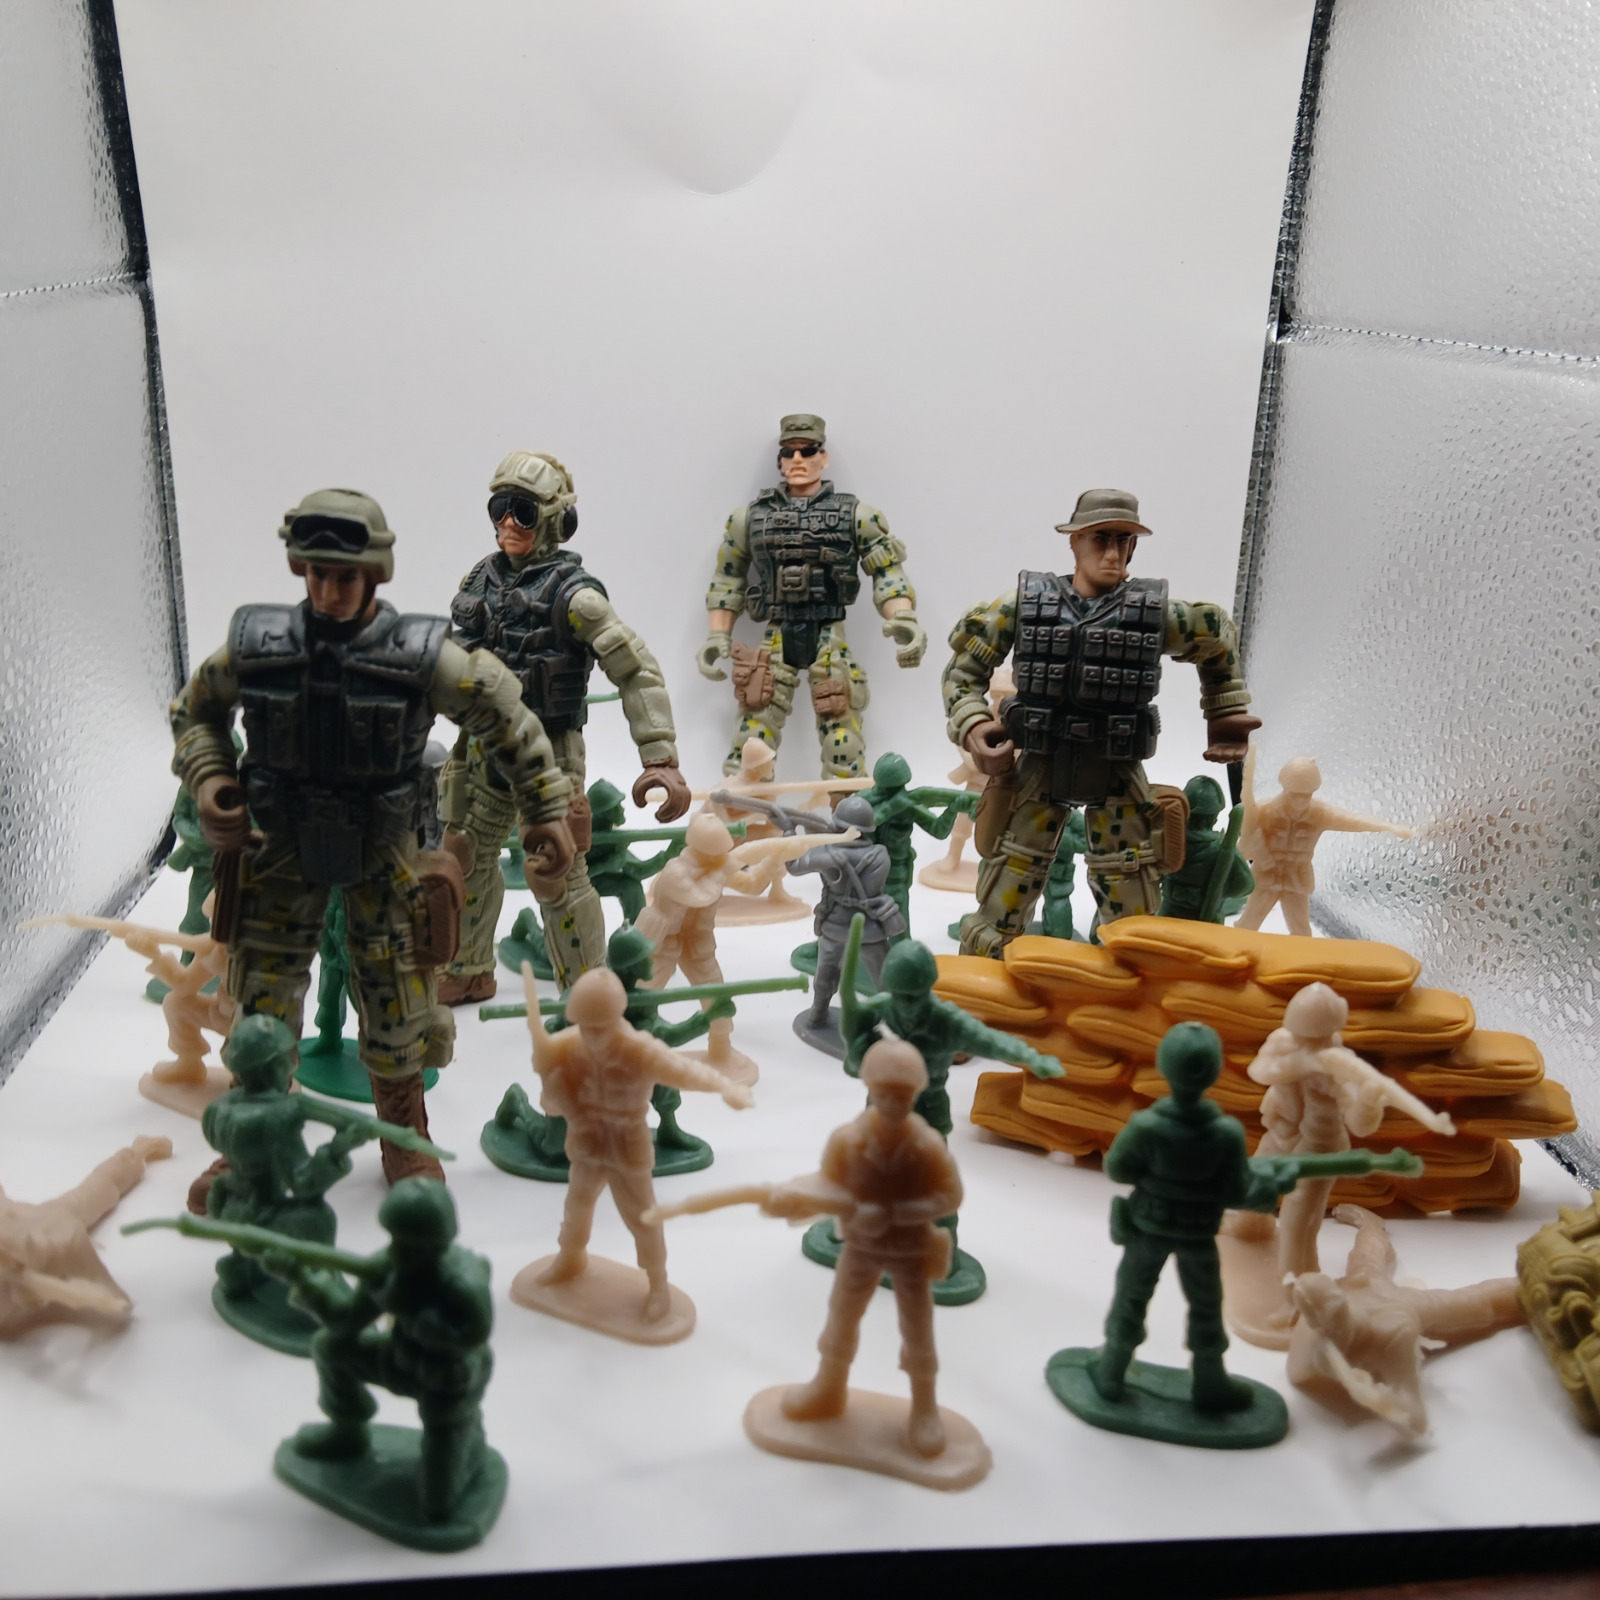 Preowned Vintage Army Action Figures Bundle: Featuring Soldiers, Aircraft